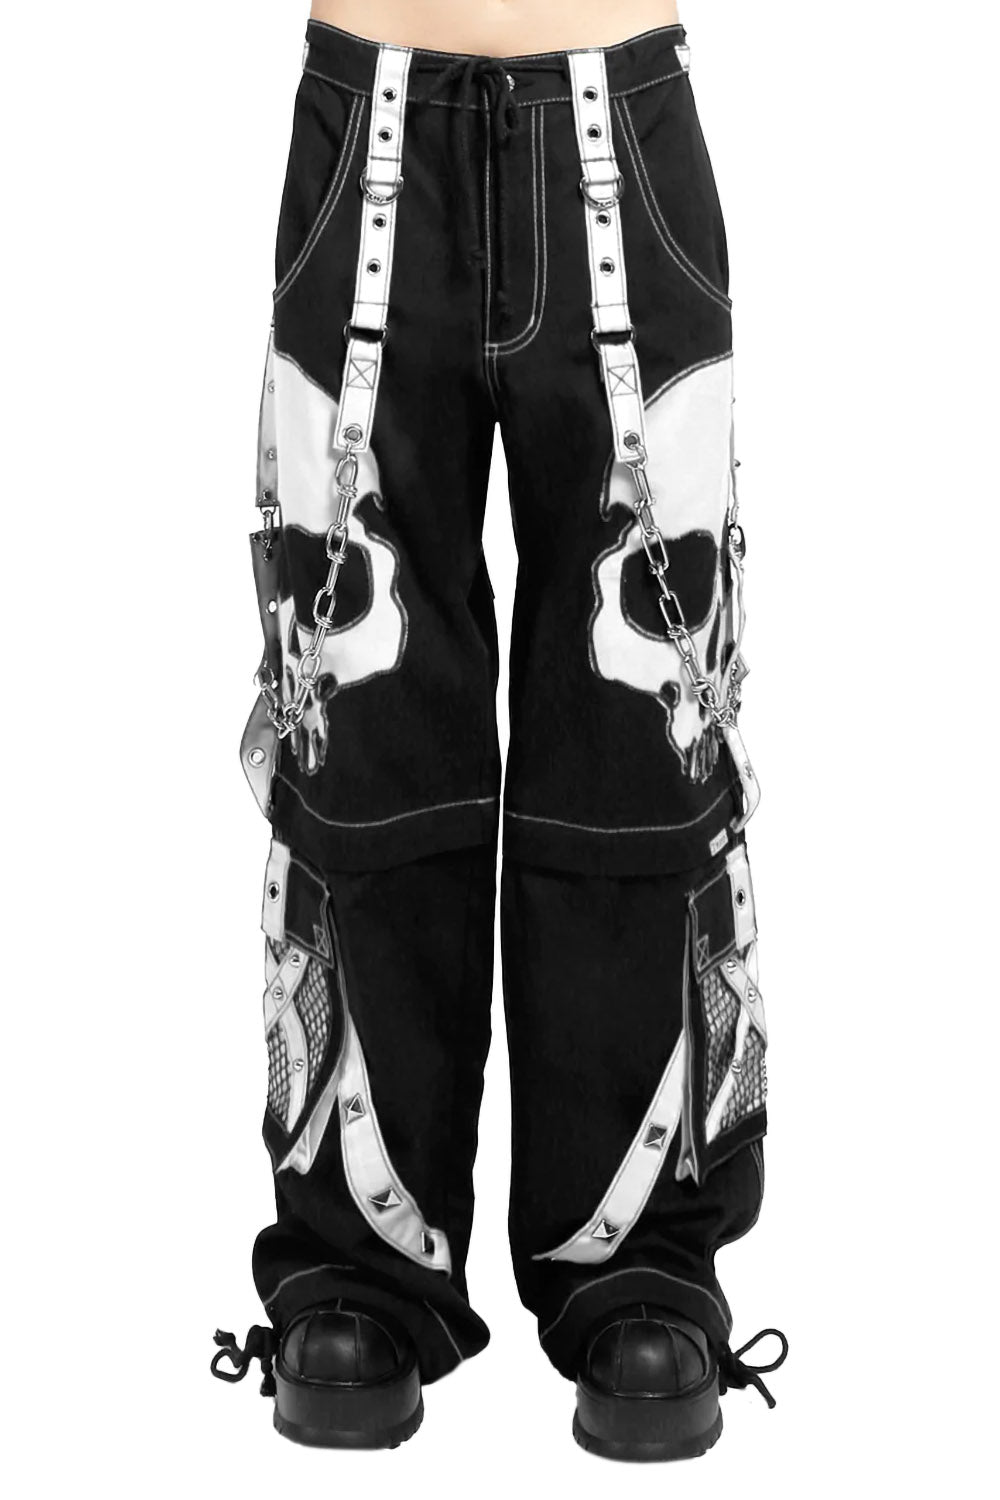 Tripp NYC Ultra Dark Street Pants S | Rave Wonderland | Outfits Rave | Festival Outfits | Rave Clothes